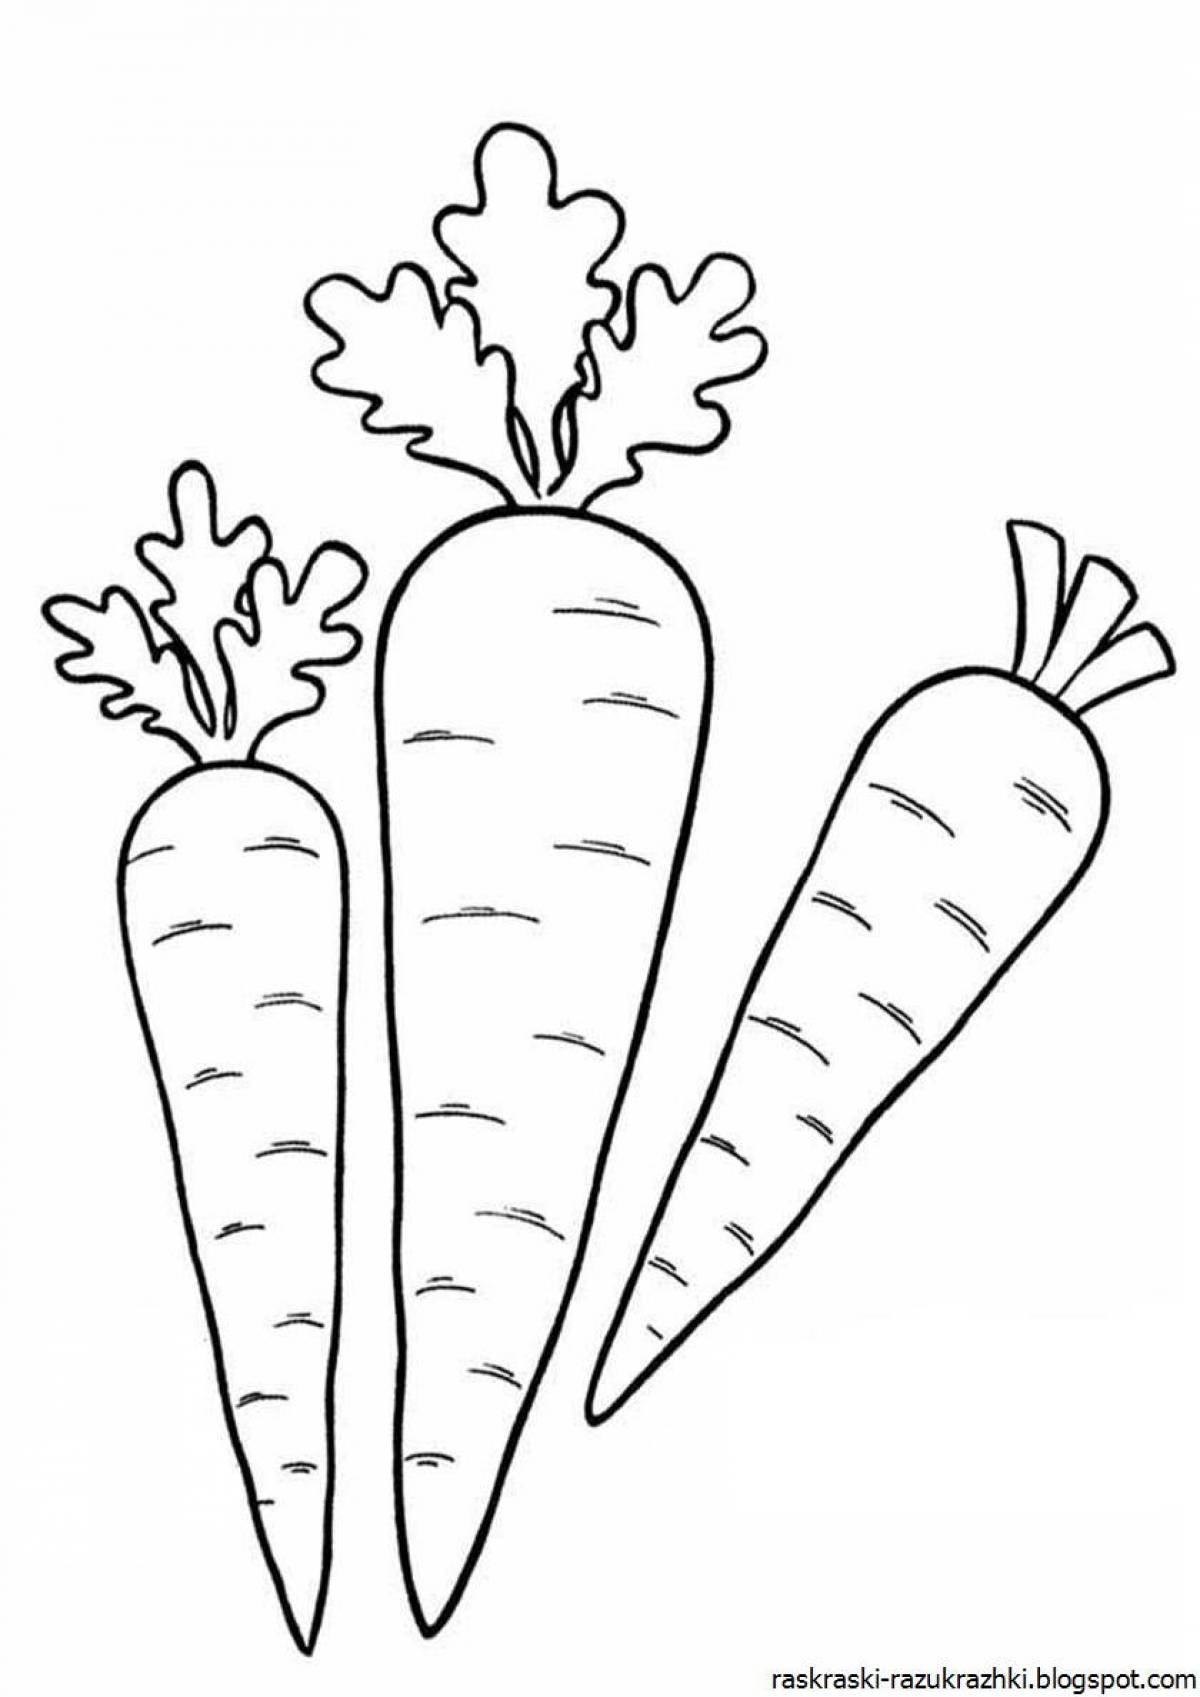 Glowing carrot coloring book for kids